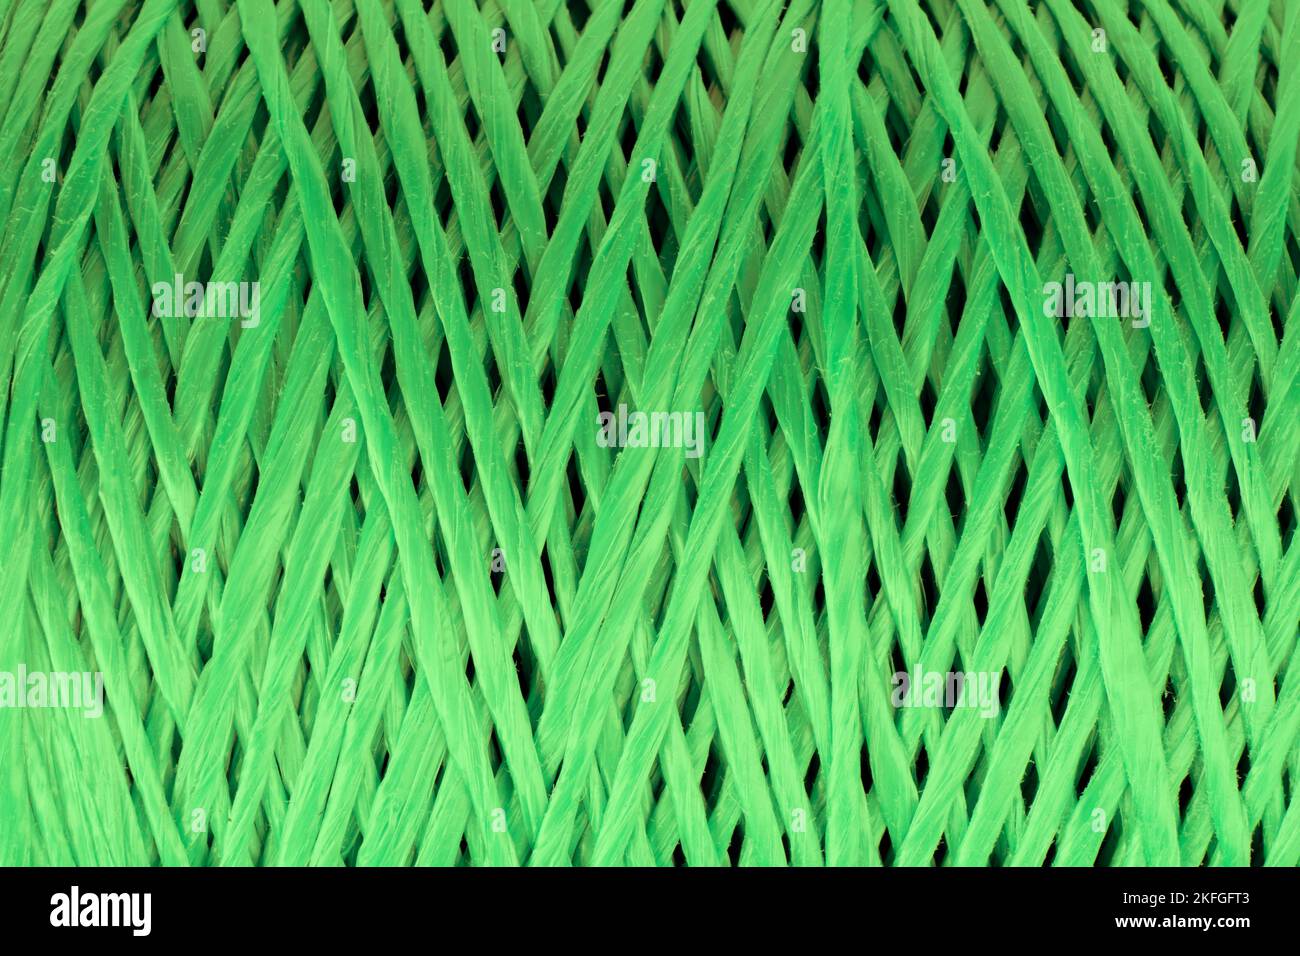 Coiled nylon rope texture background. Green rolled  striped nylon rope pattern. A coil of new colored rope surface Stock Photo